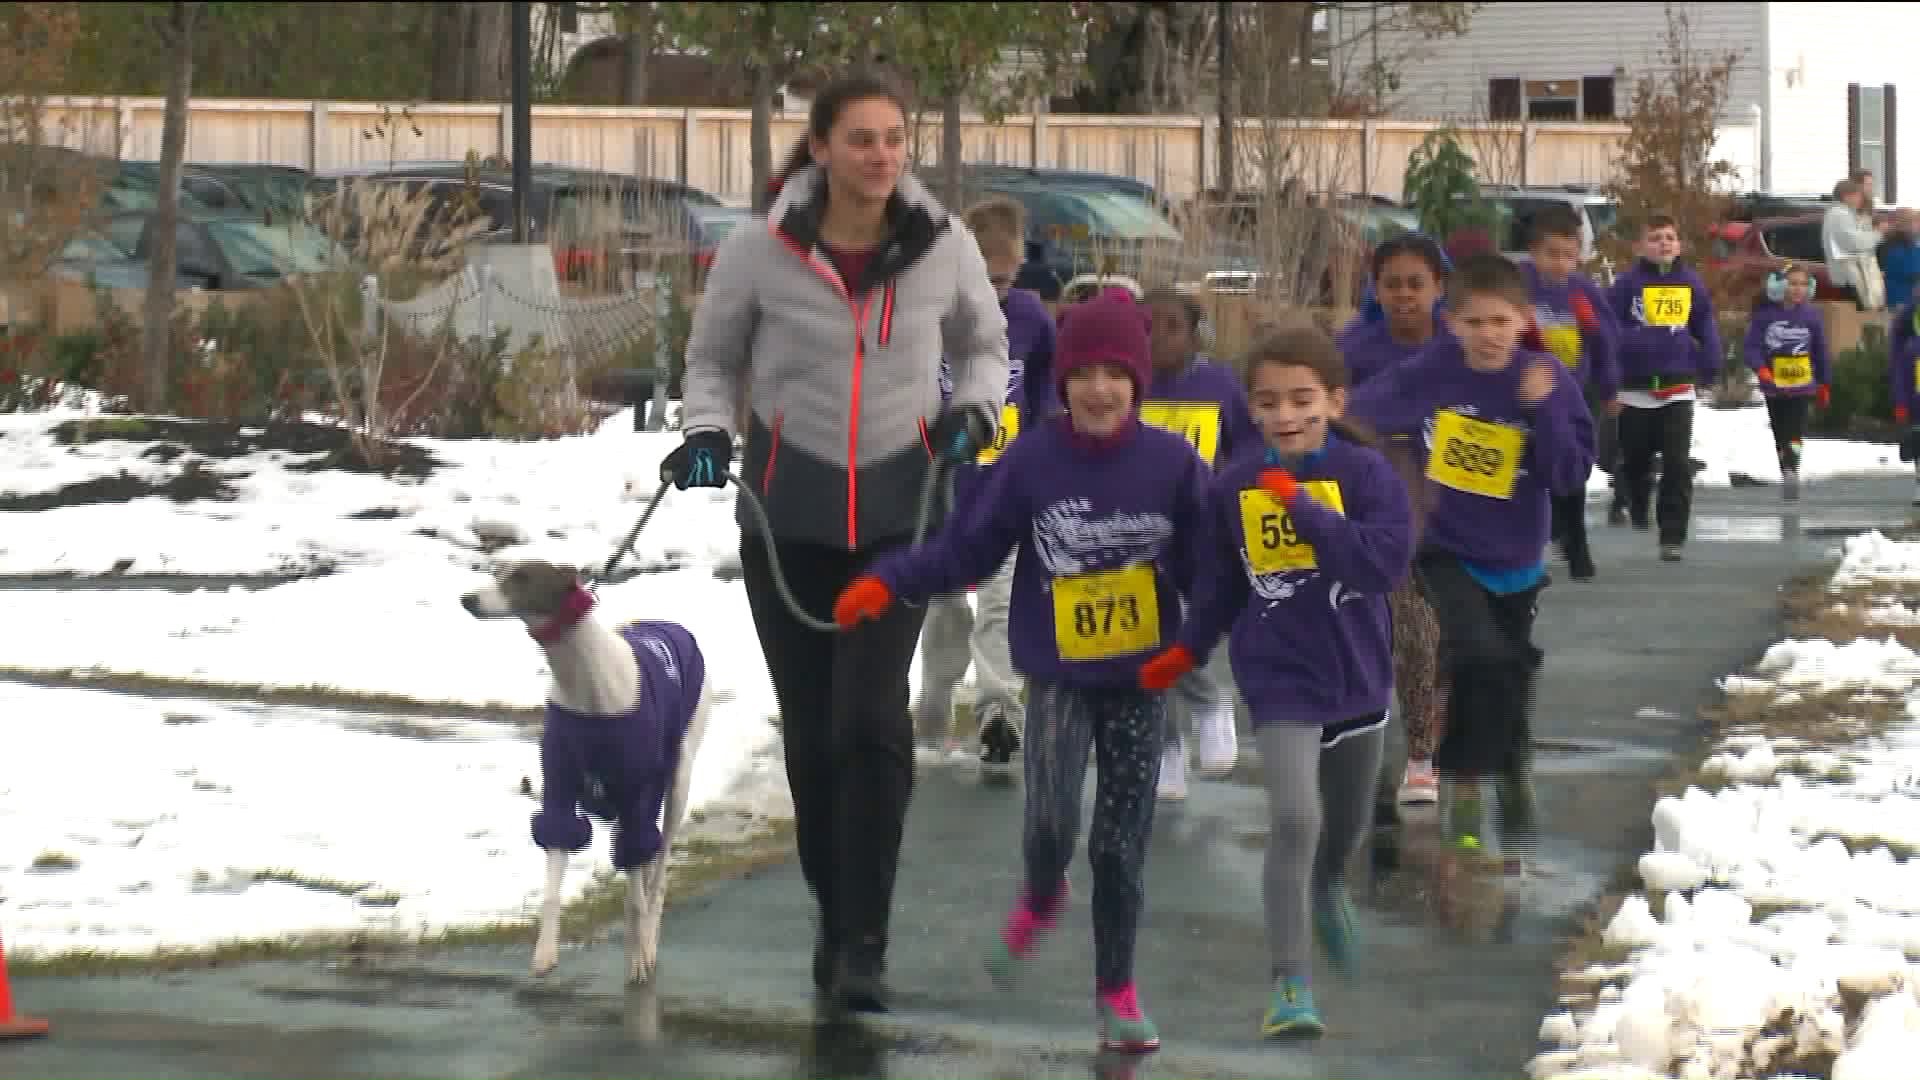 Hundreds participate in the Manchester Road Race despite snow and ice